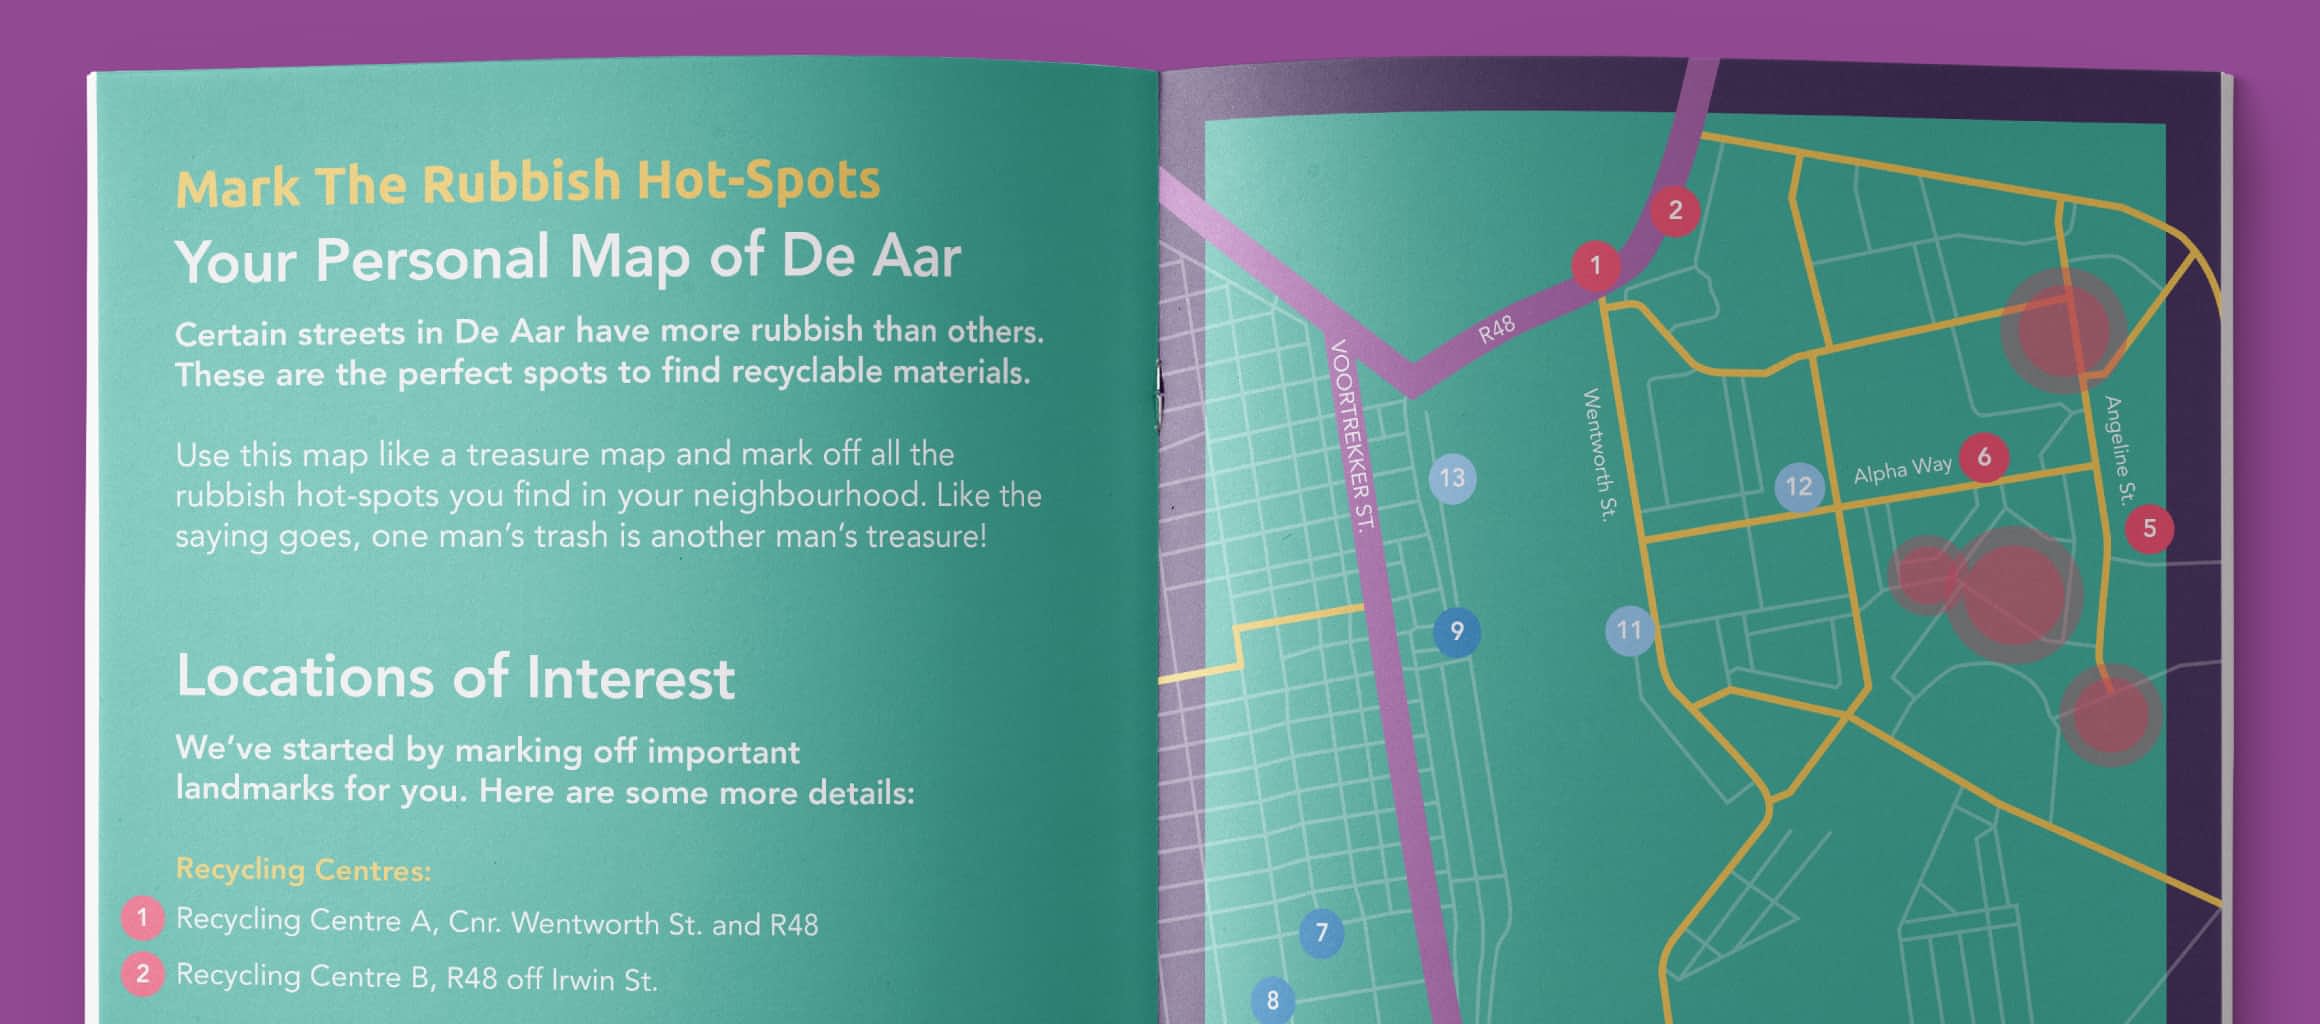 Creative Recycling Programme Booklet Design Showing a Map of De Aar with Rubbish Hot Spots Highlighted